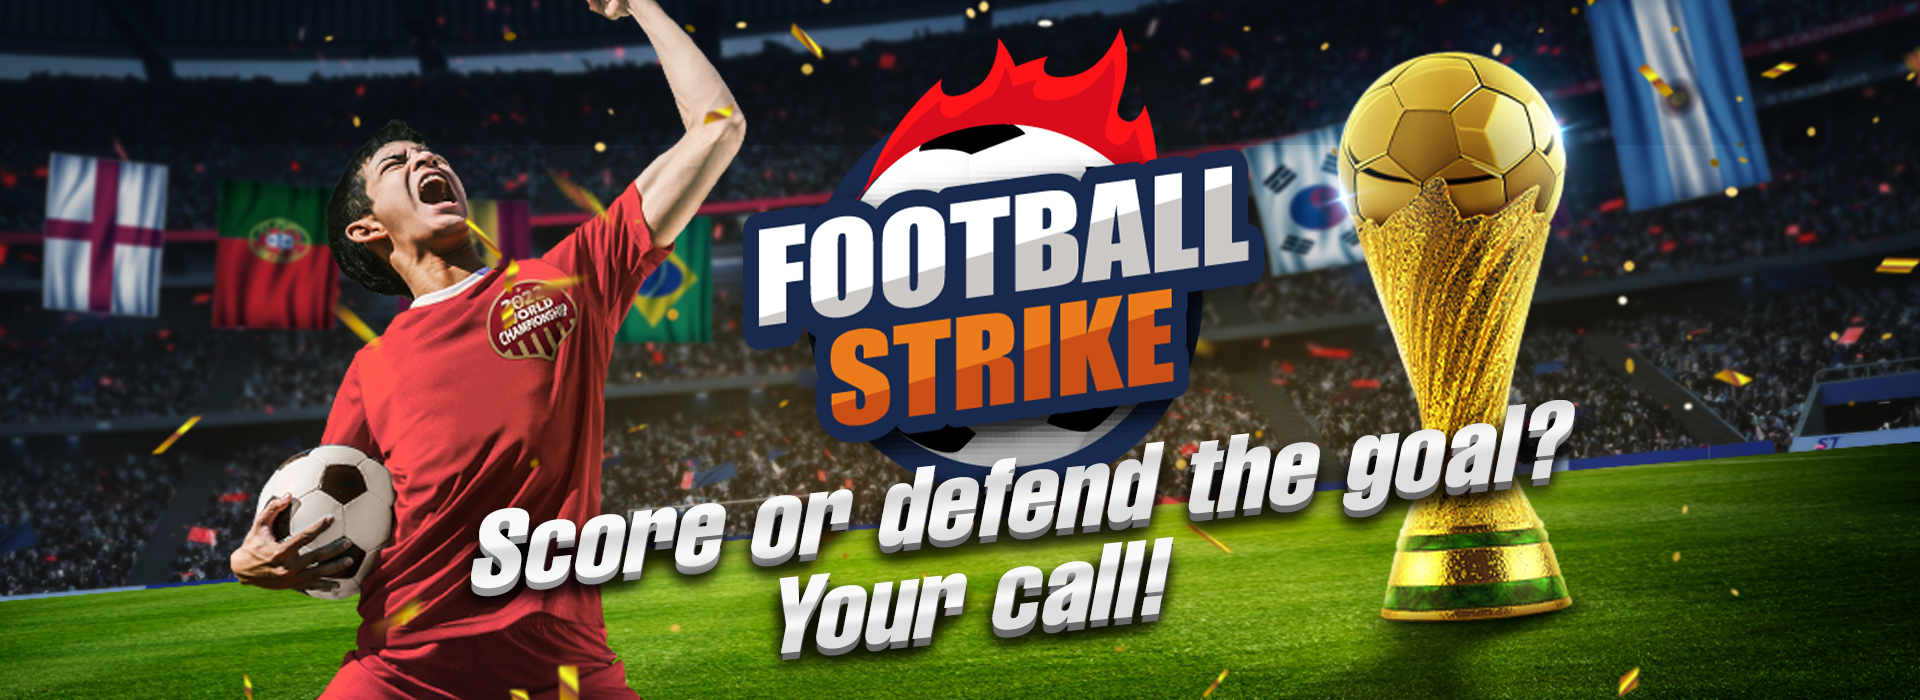 Funky Games Football Strike with World Cup Web Banner - GamingSoft